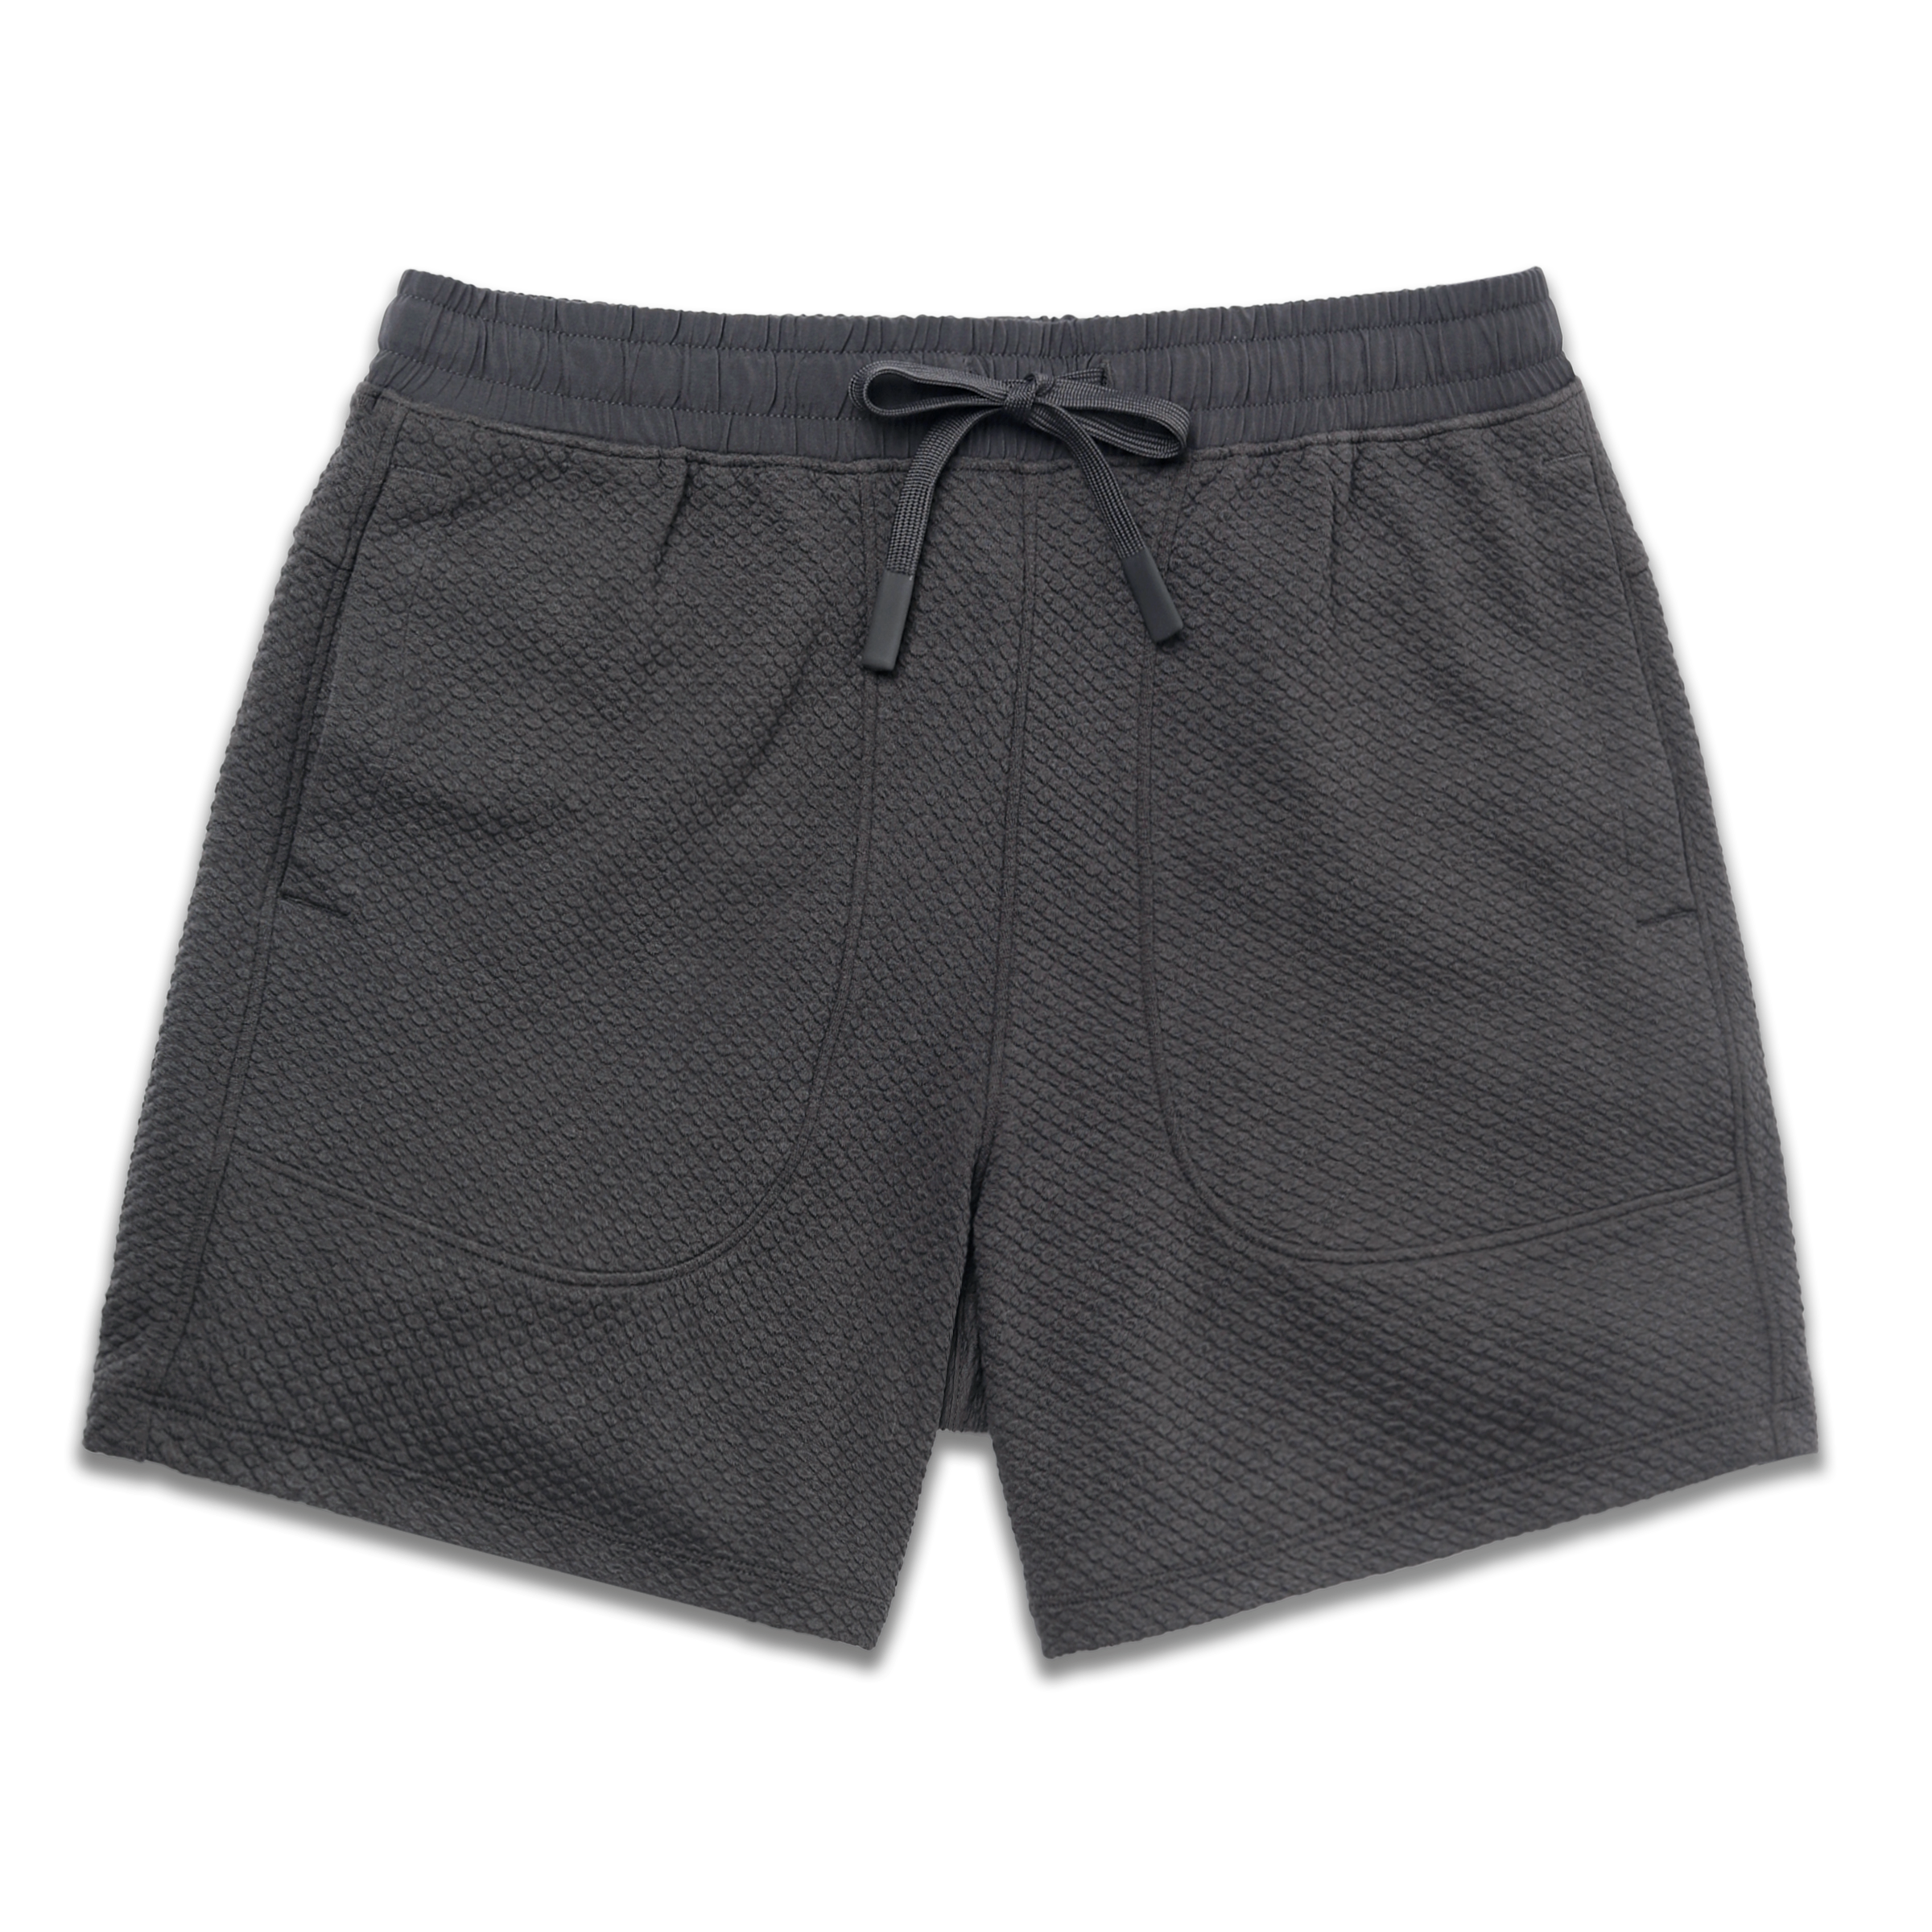 Roam Short 5.5" Coal front with an elastic waistband, two side seam pockets, and dyed to match drawstring